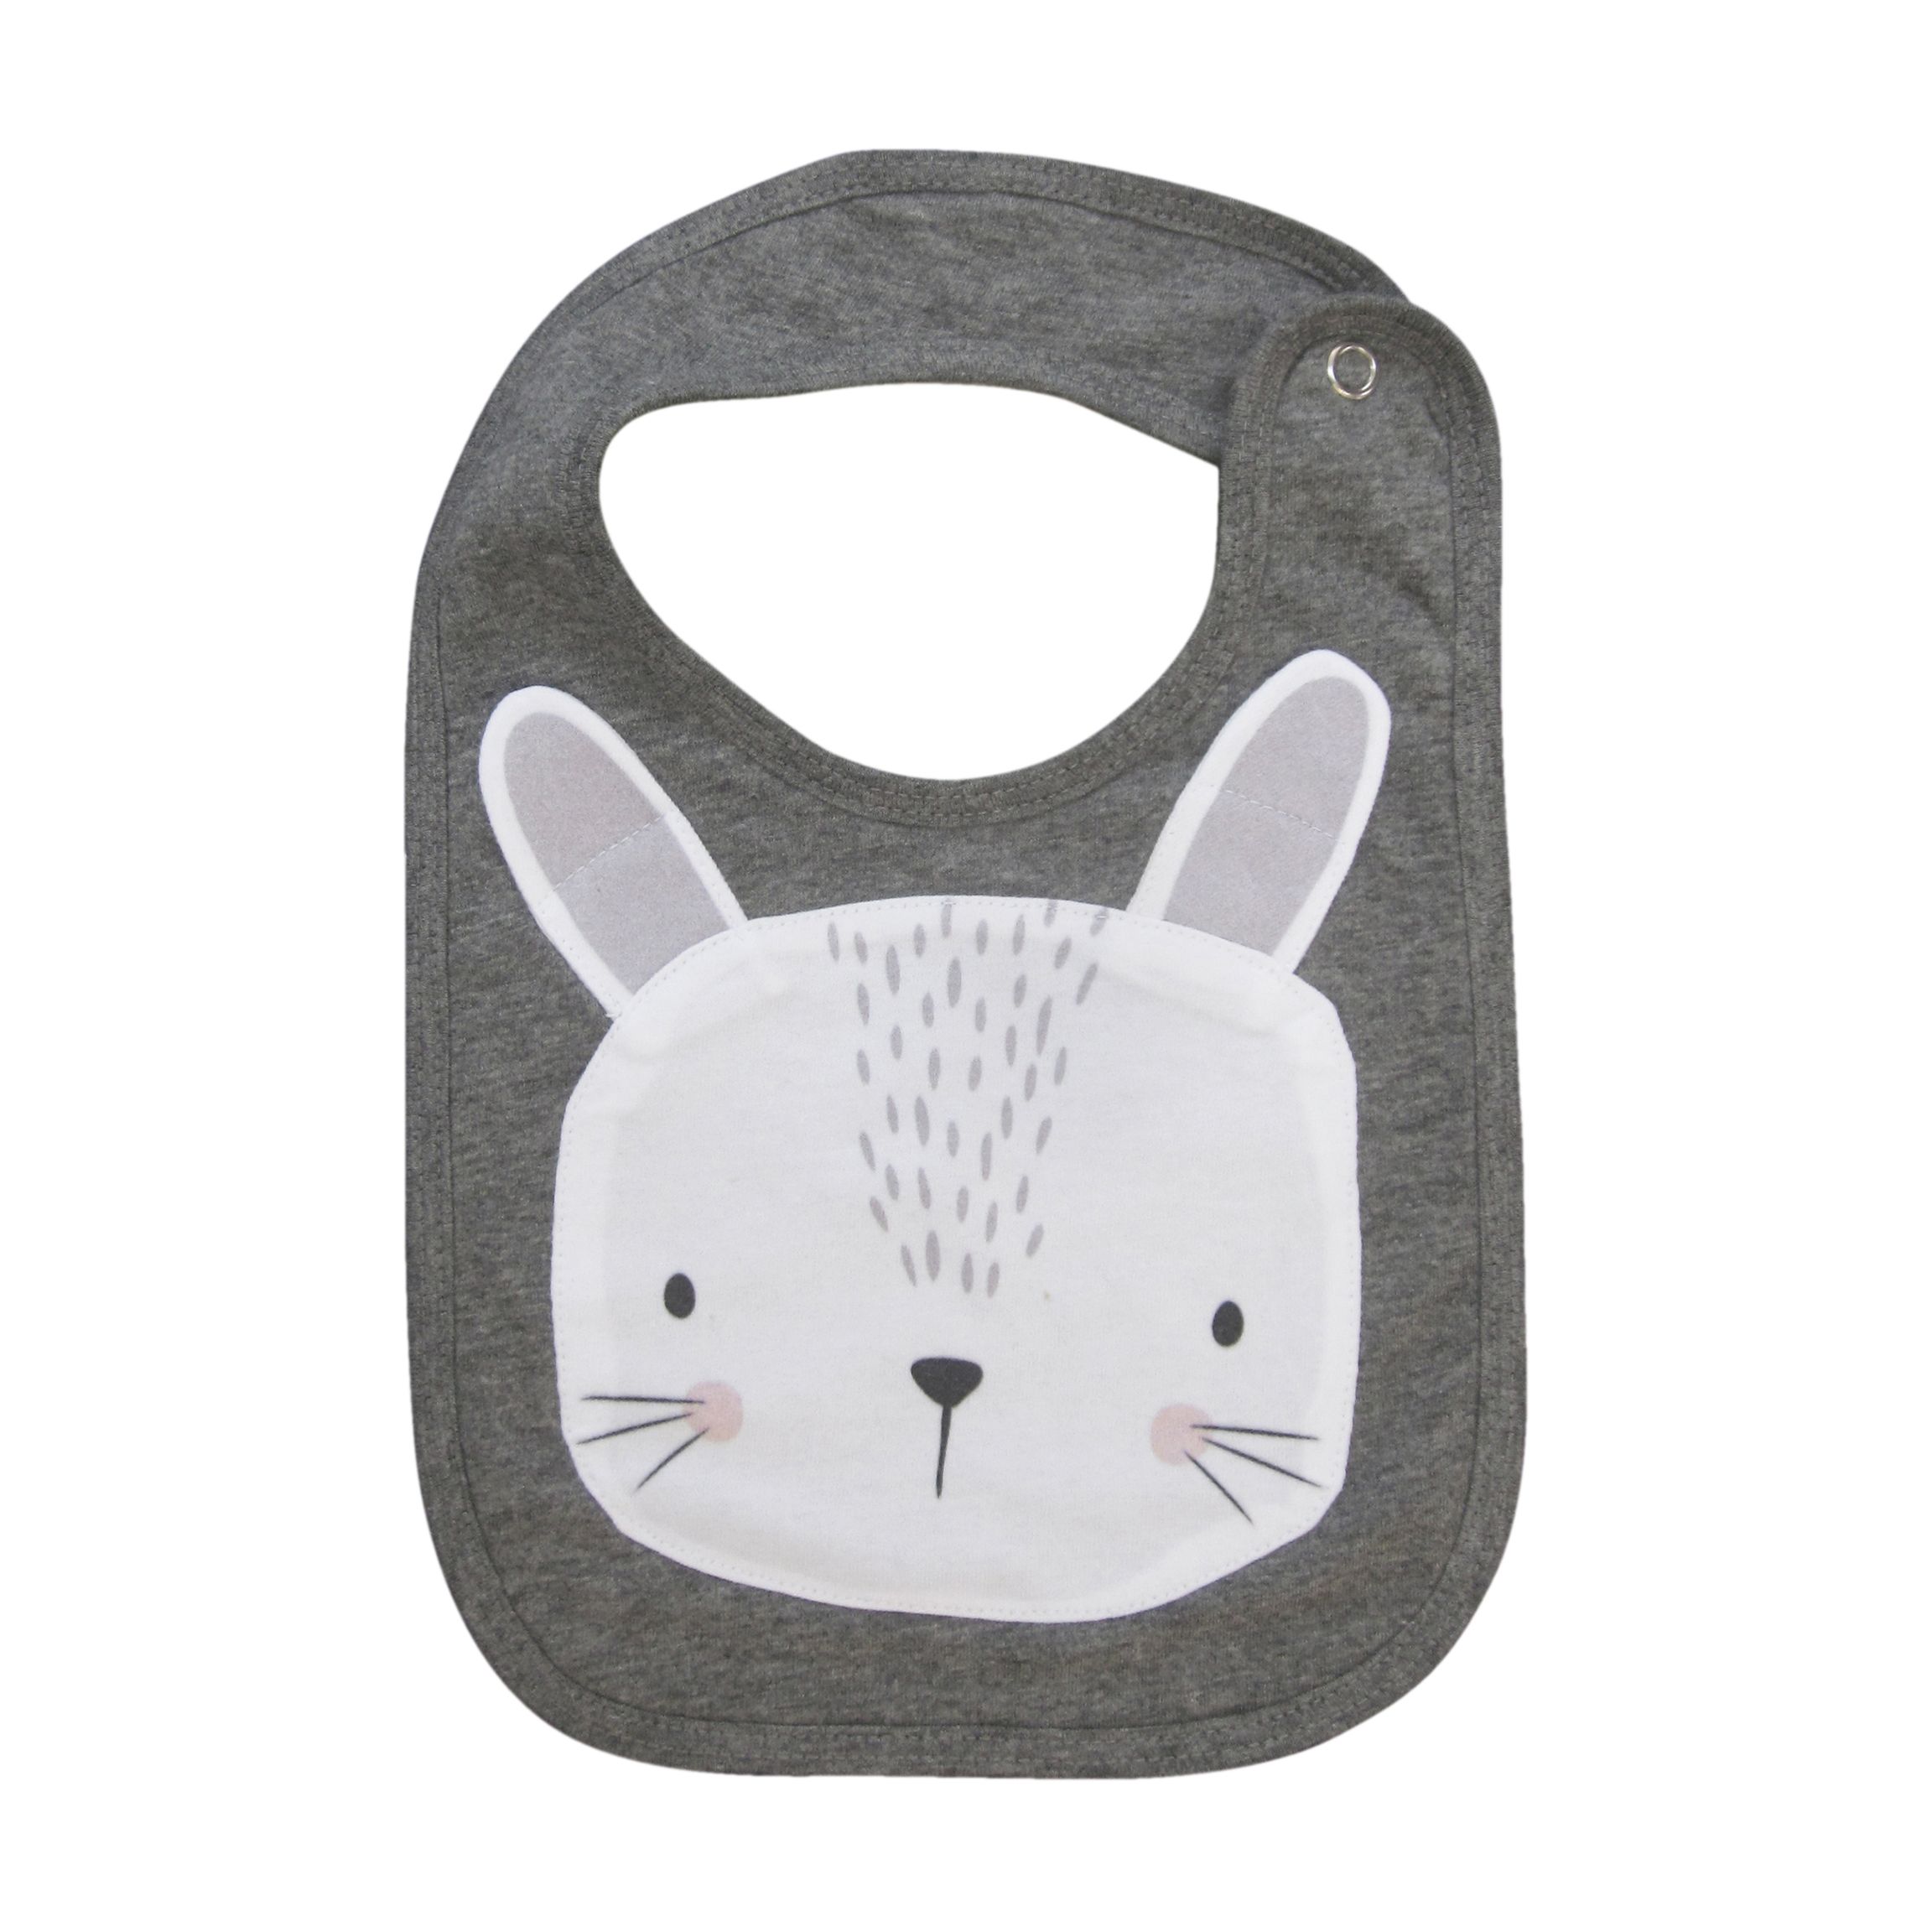 Animal Face Bib for Babies and Toddlers Everyday Wear and Mealtimes